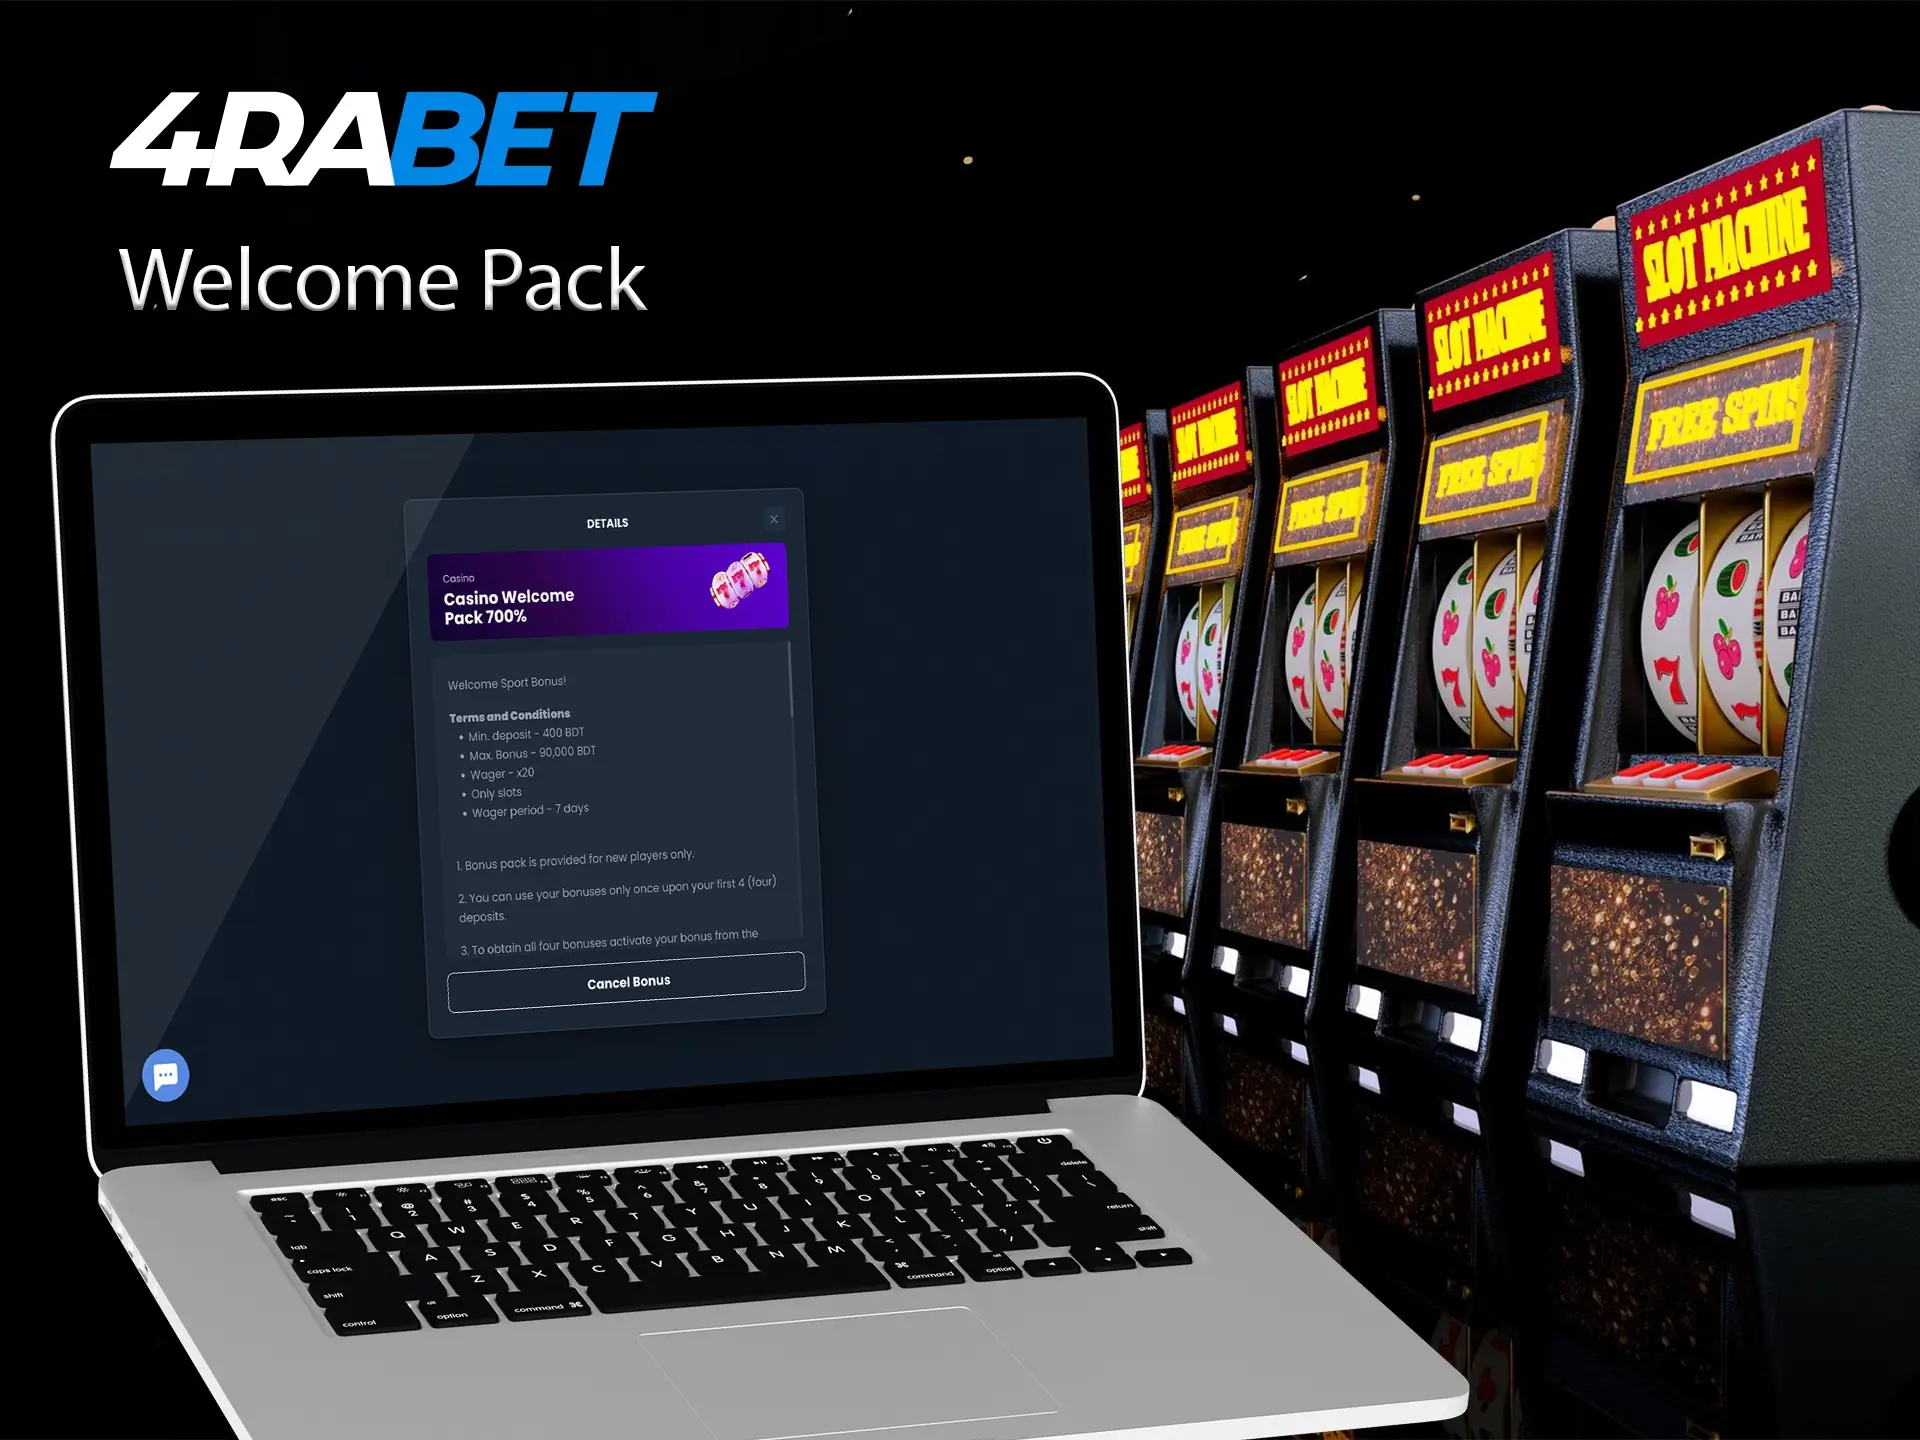 The 4rabet promo will please any gambling and casino lover.